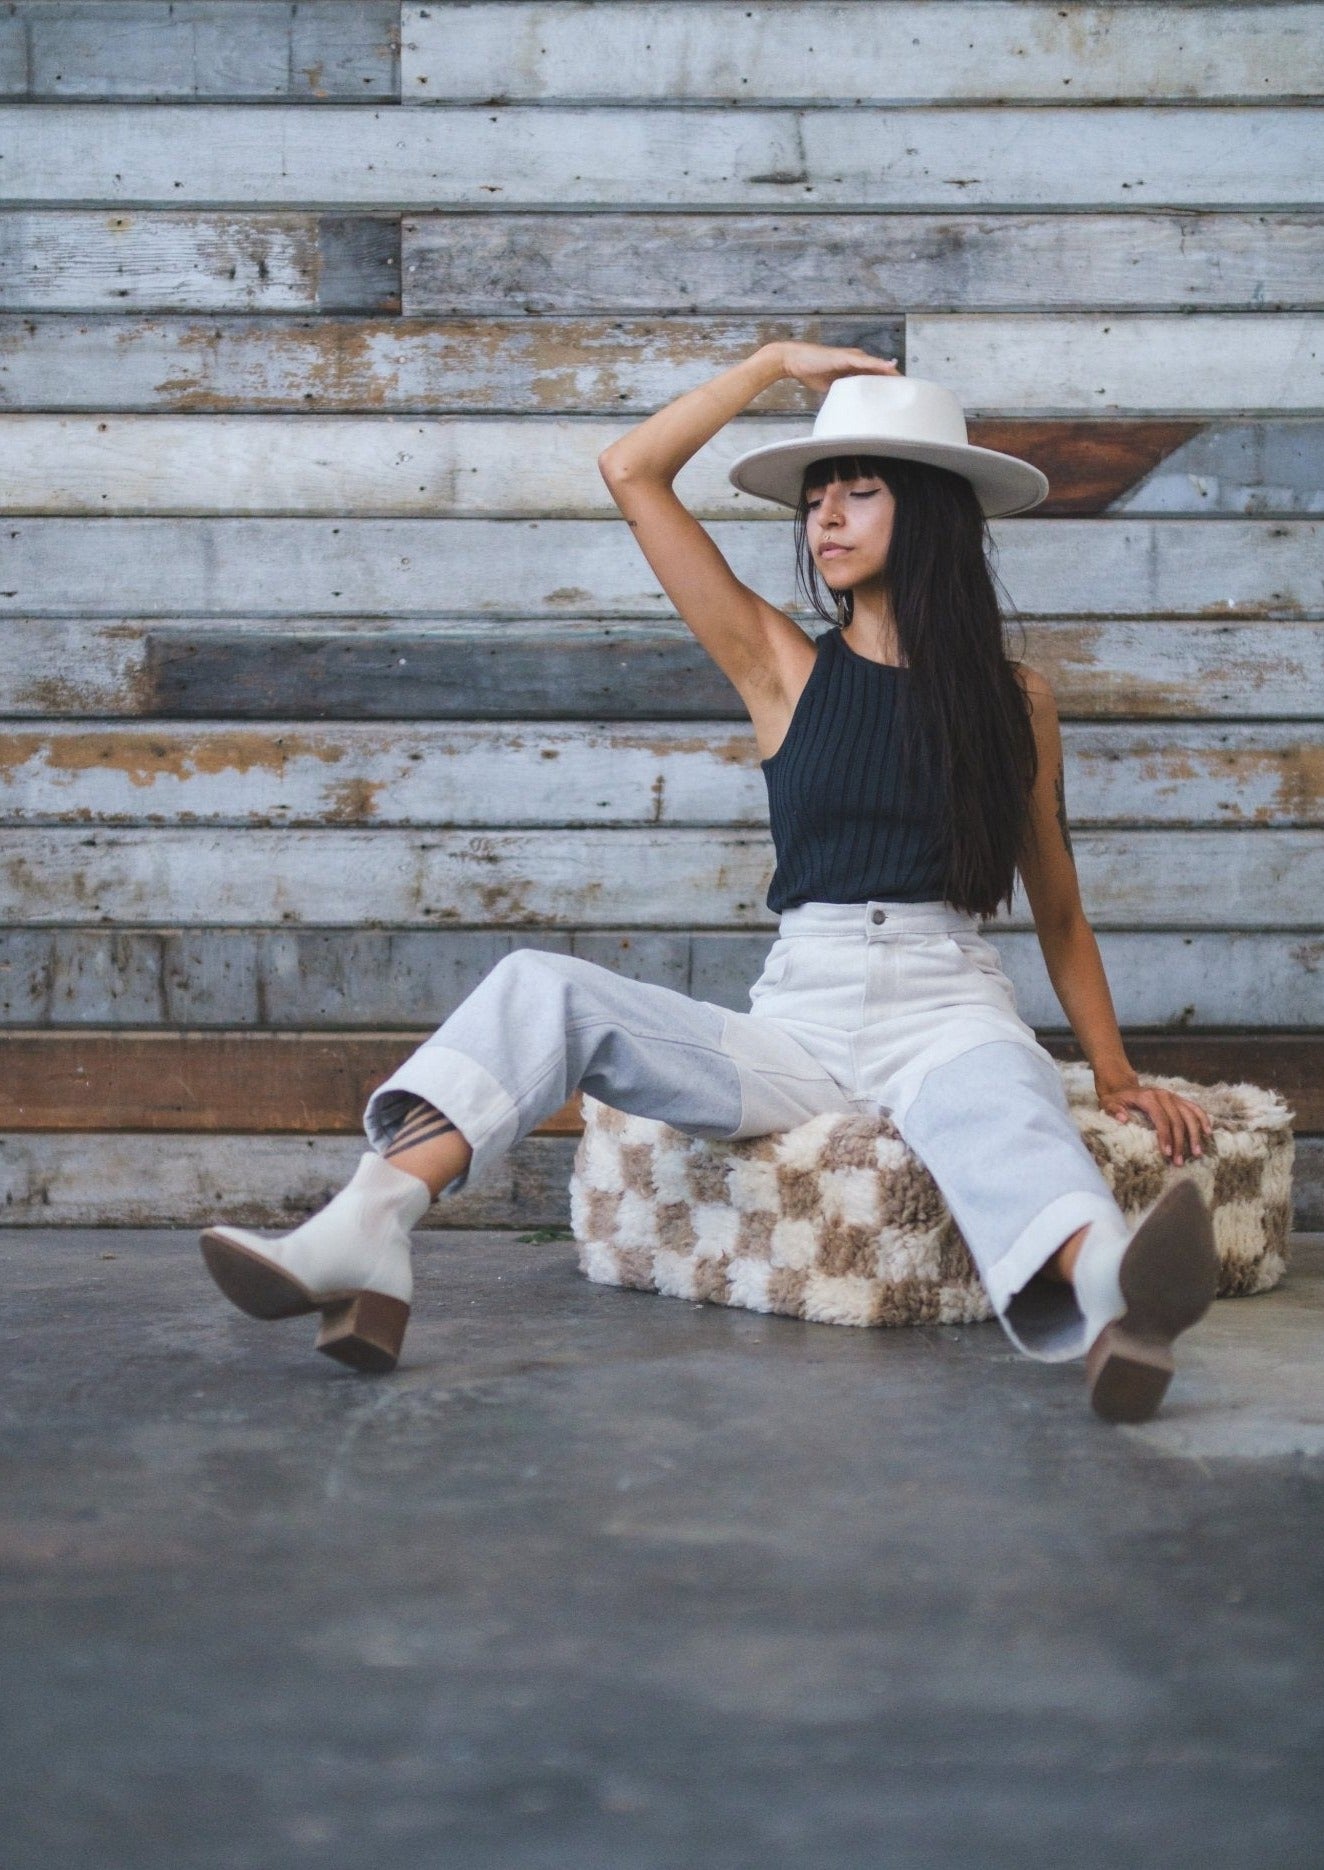 girl kick backs and relaxes on a moroccan floor cushion checkered tan and white. she is wearing a white hat and white boots top and bottom are soluna collective made from organic fibers. she is leaning against a rustic wood wall on cement floors